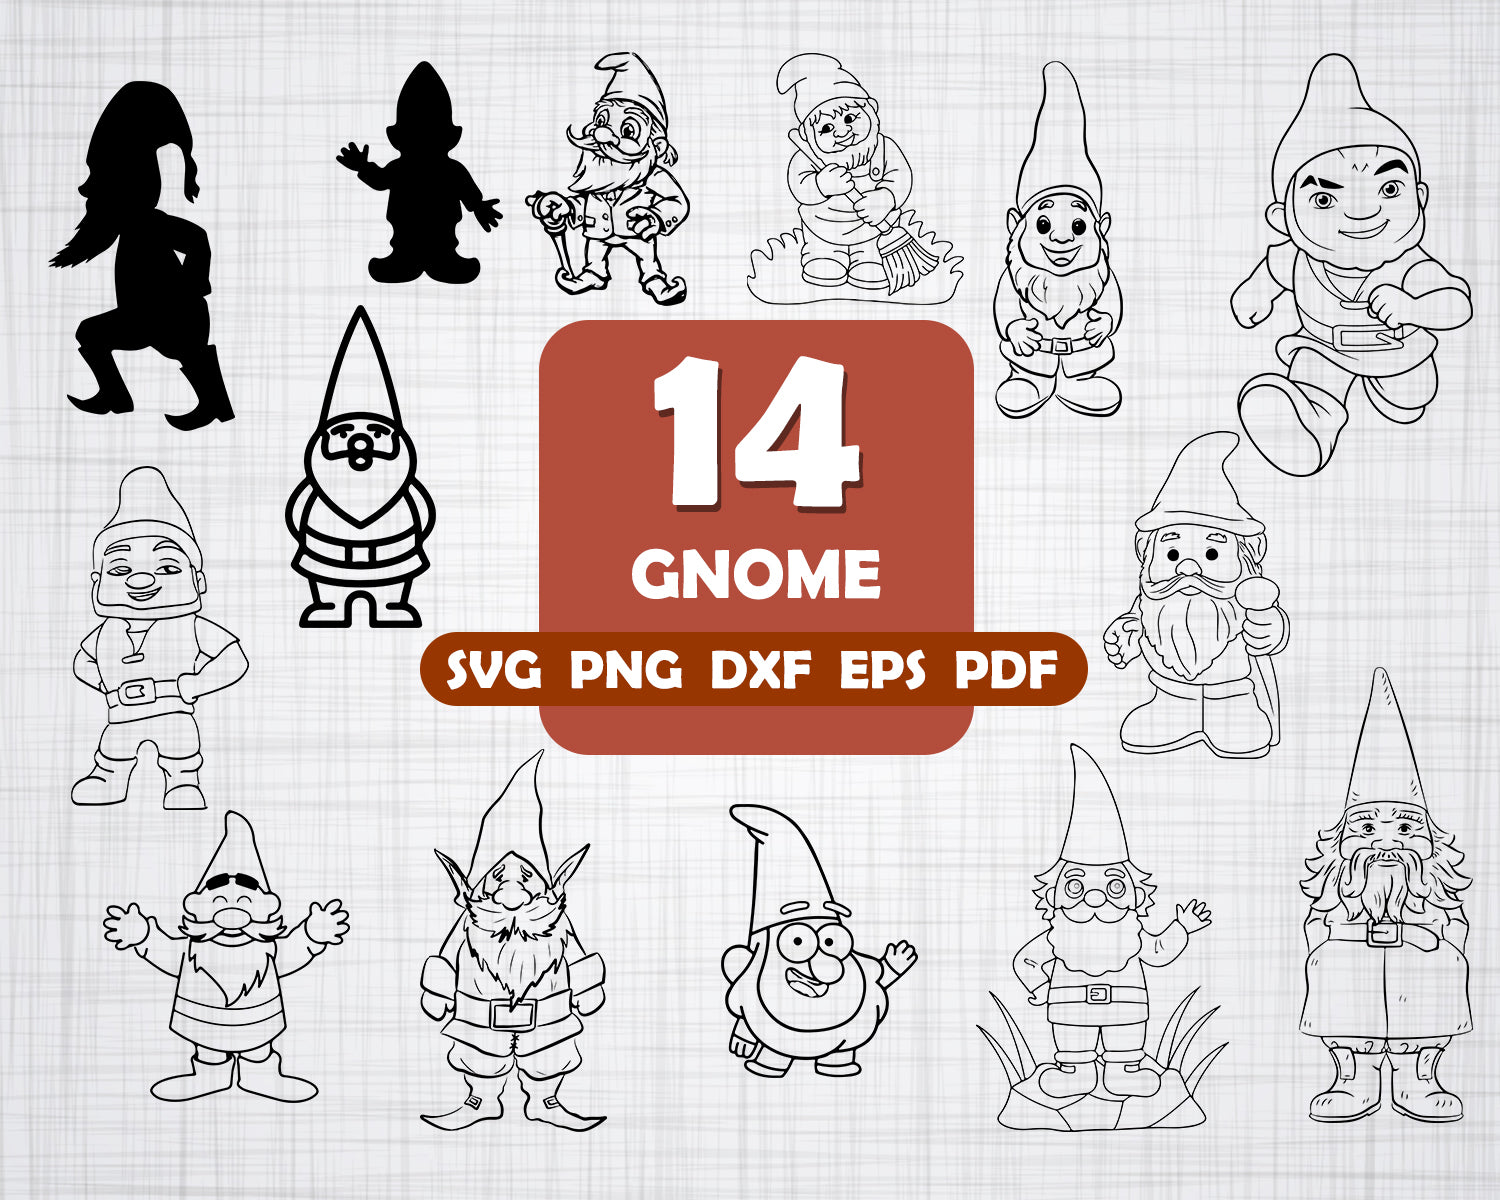 Download Clip Art Gnome Svg U2022 Christmas Gnome Sweet Gnome Dxf File U2022 Hand Drawn Xmas Clip Art Png Instant Download Art Collectibles